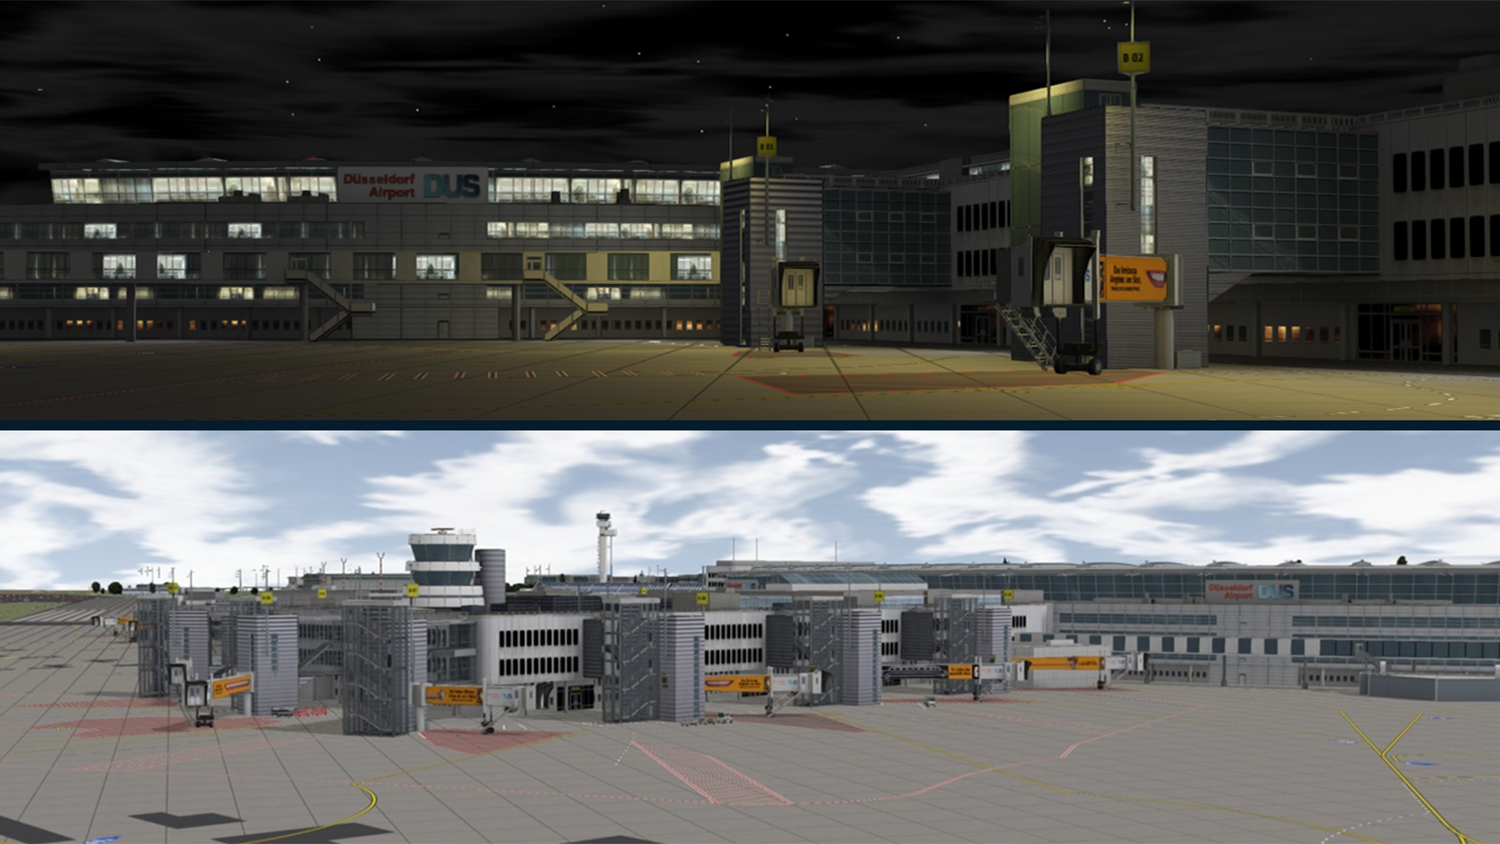 Day and night time at Dusseldorf Airport in the simulated training environment for ARFF and airport workers.